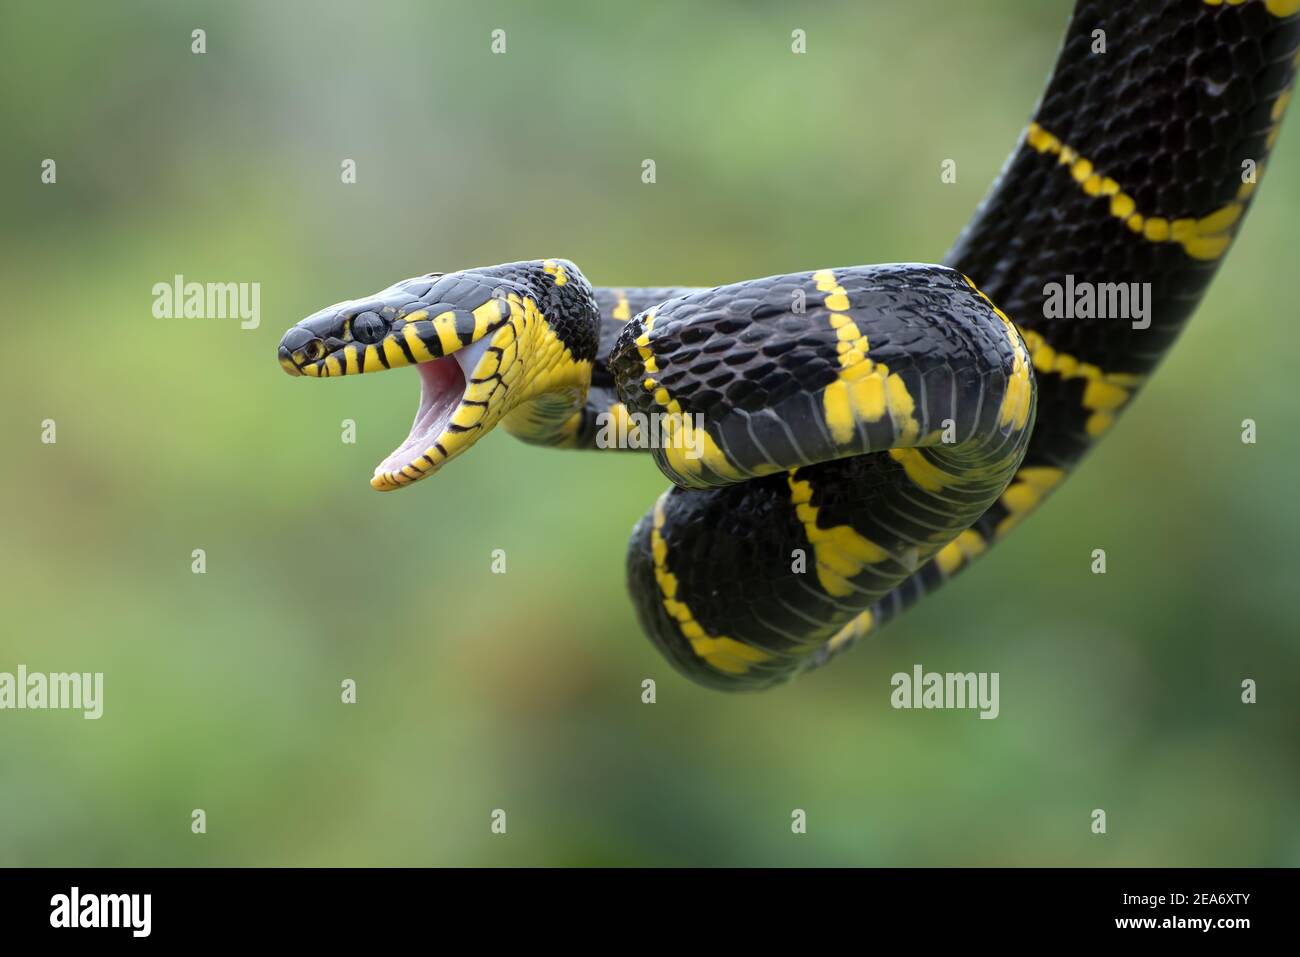 Close-up of Gold-ringed cat snake with an open mouth, Indonesia Stock Photo